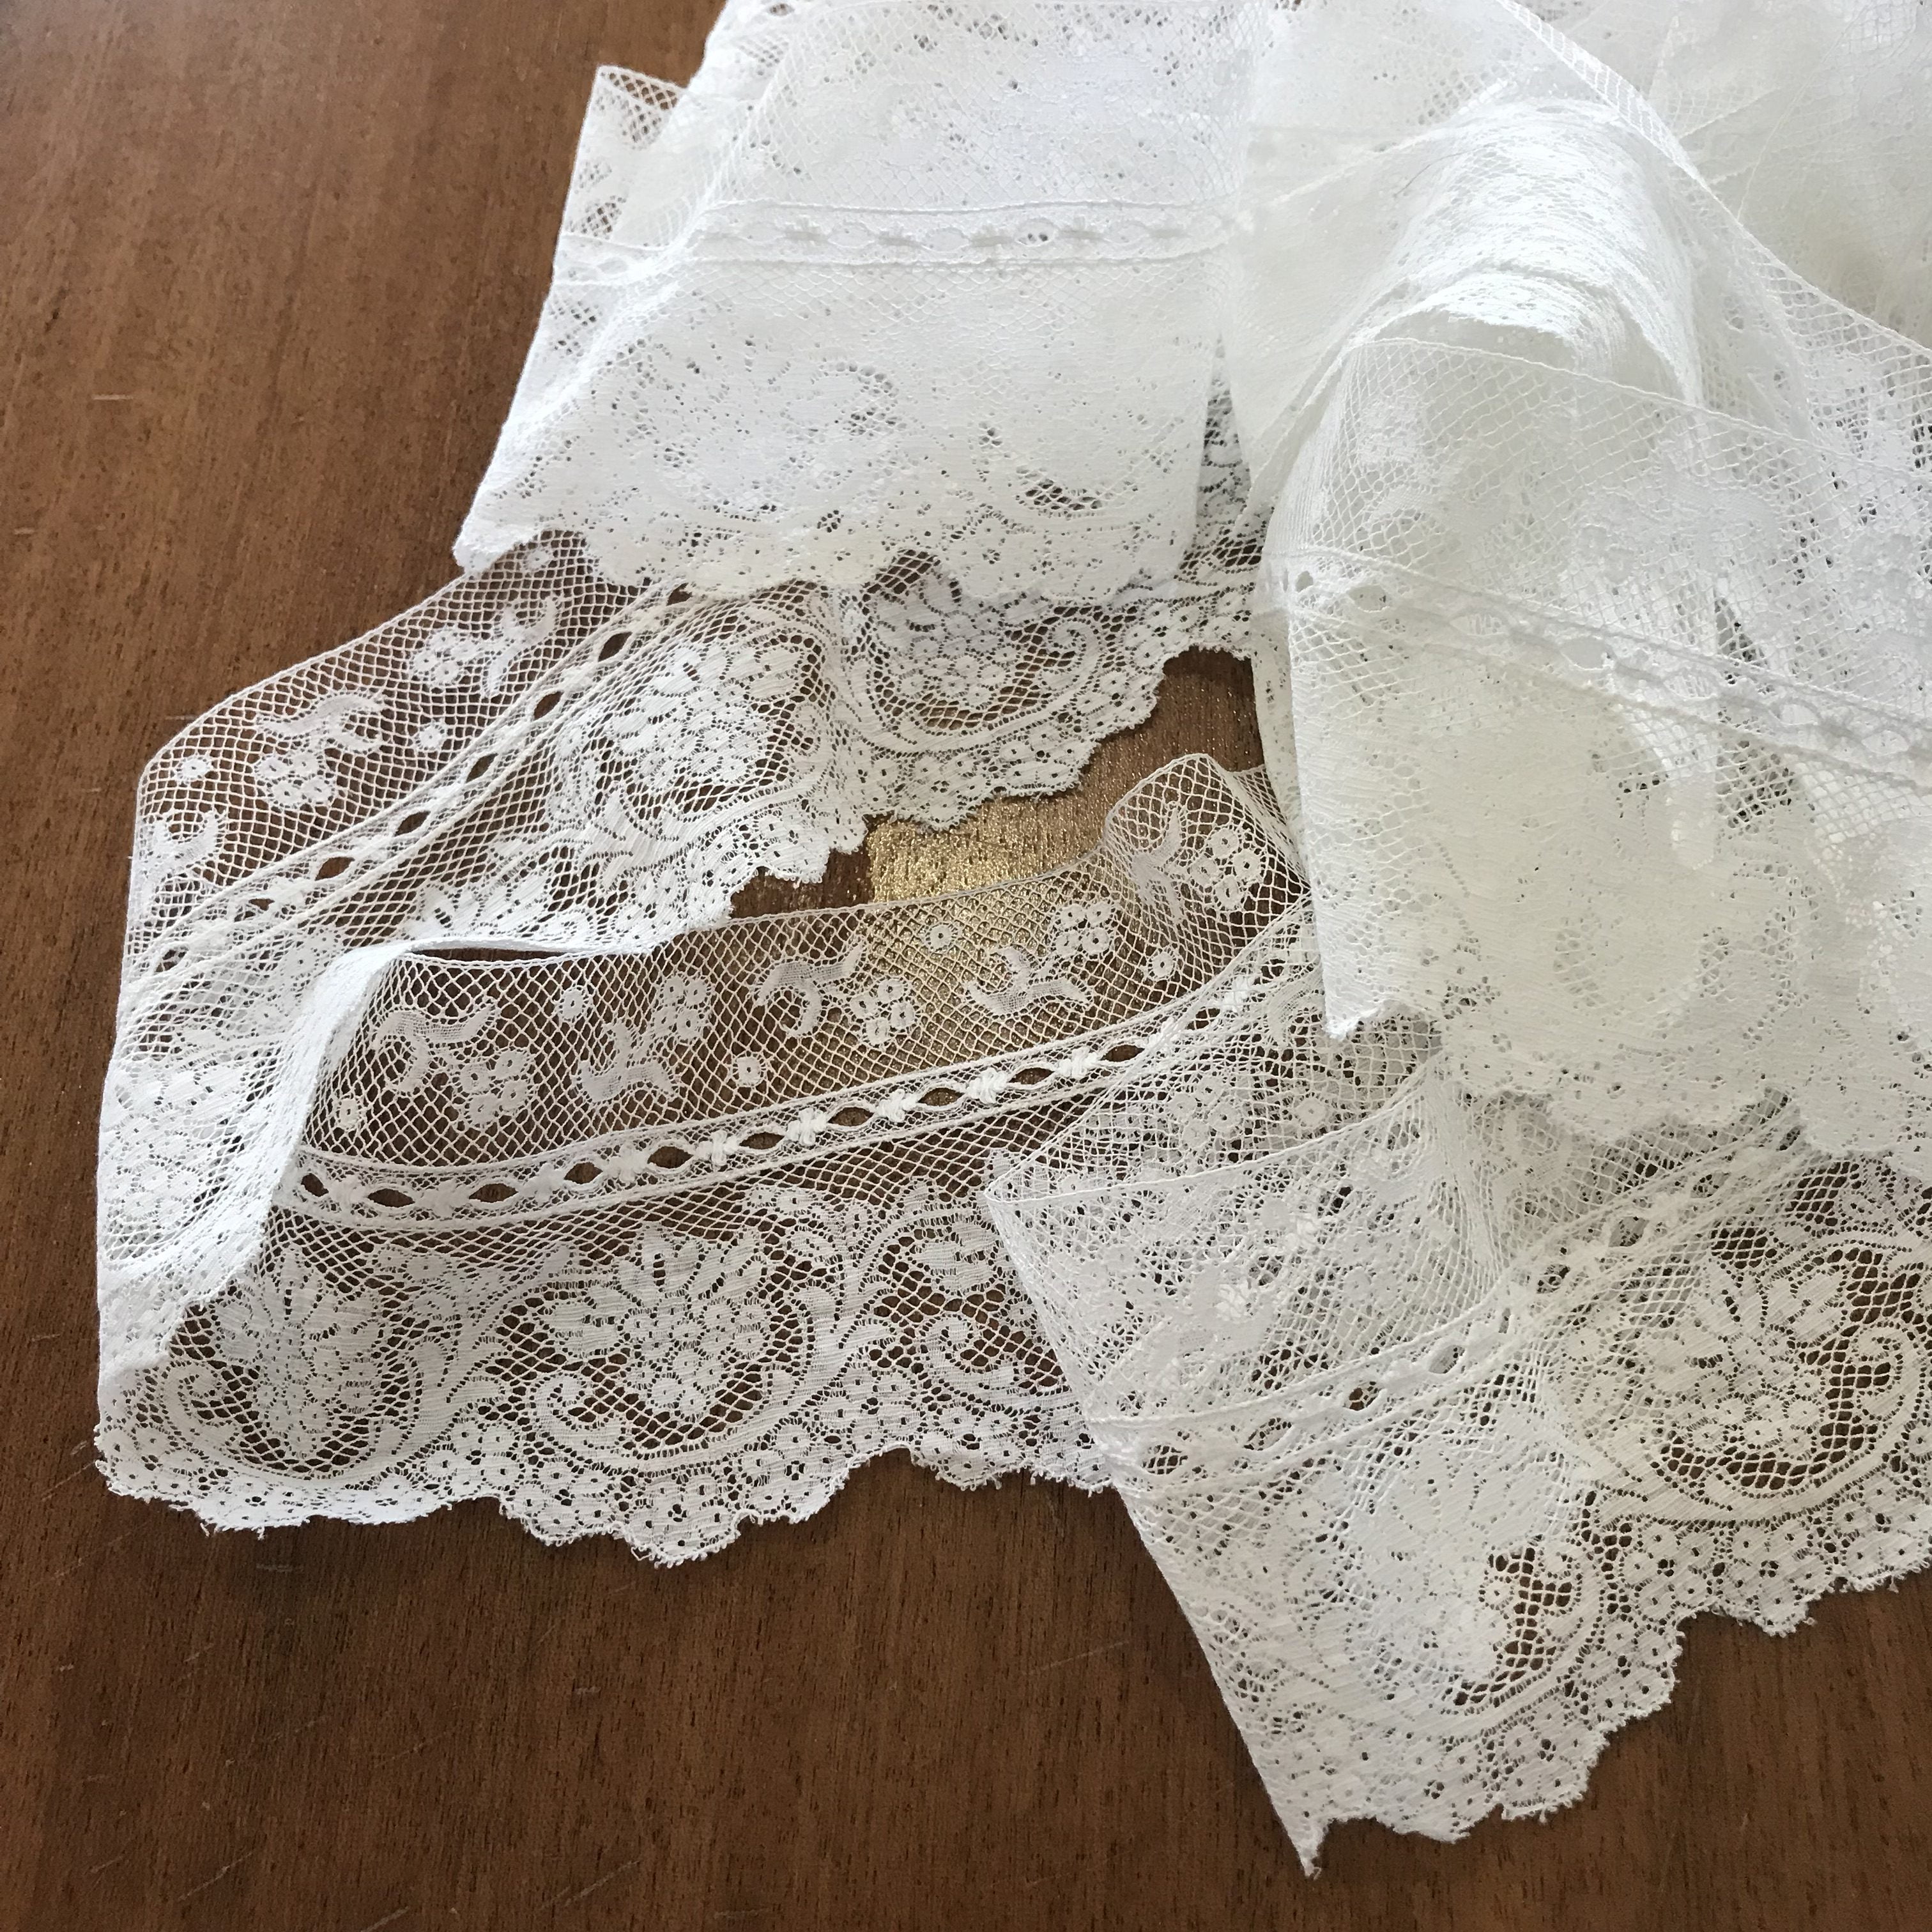 How to master insertion lace... in pictures - Cathy Hay